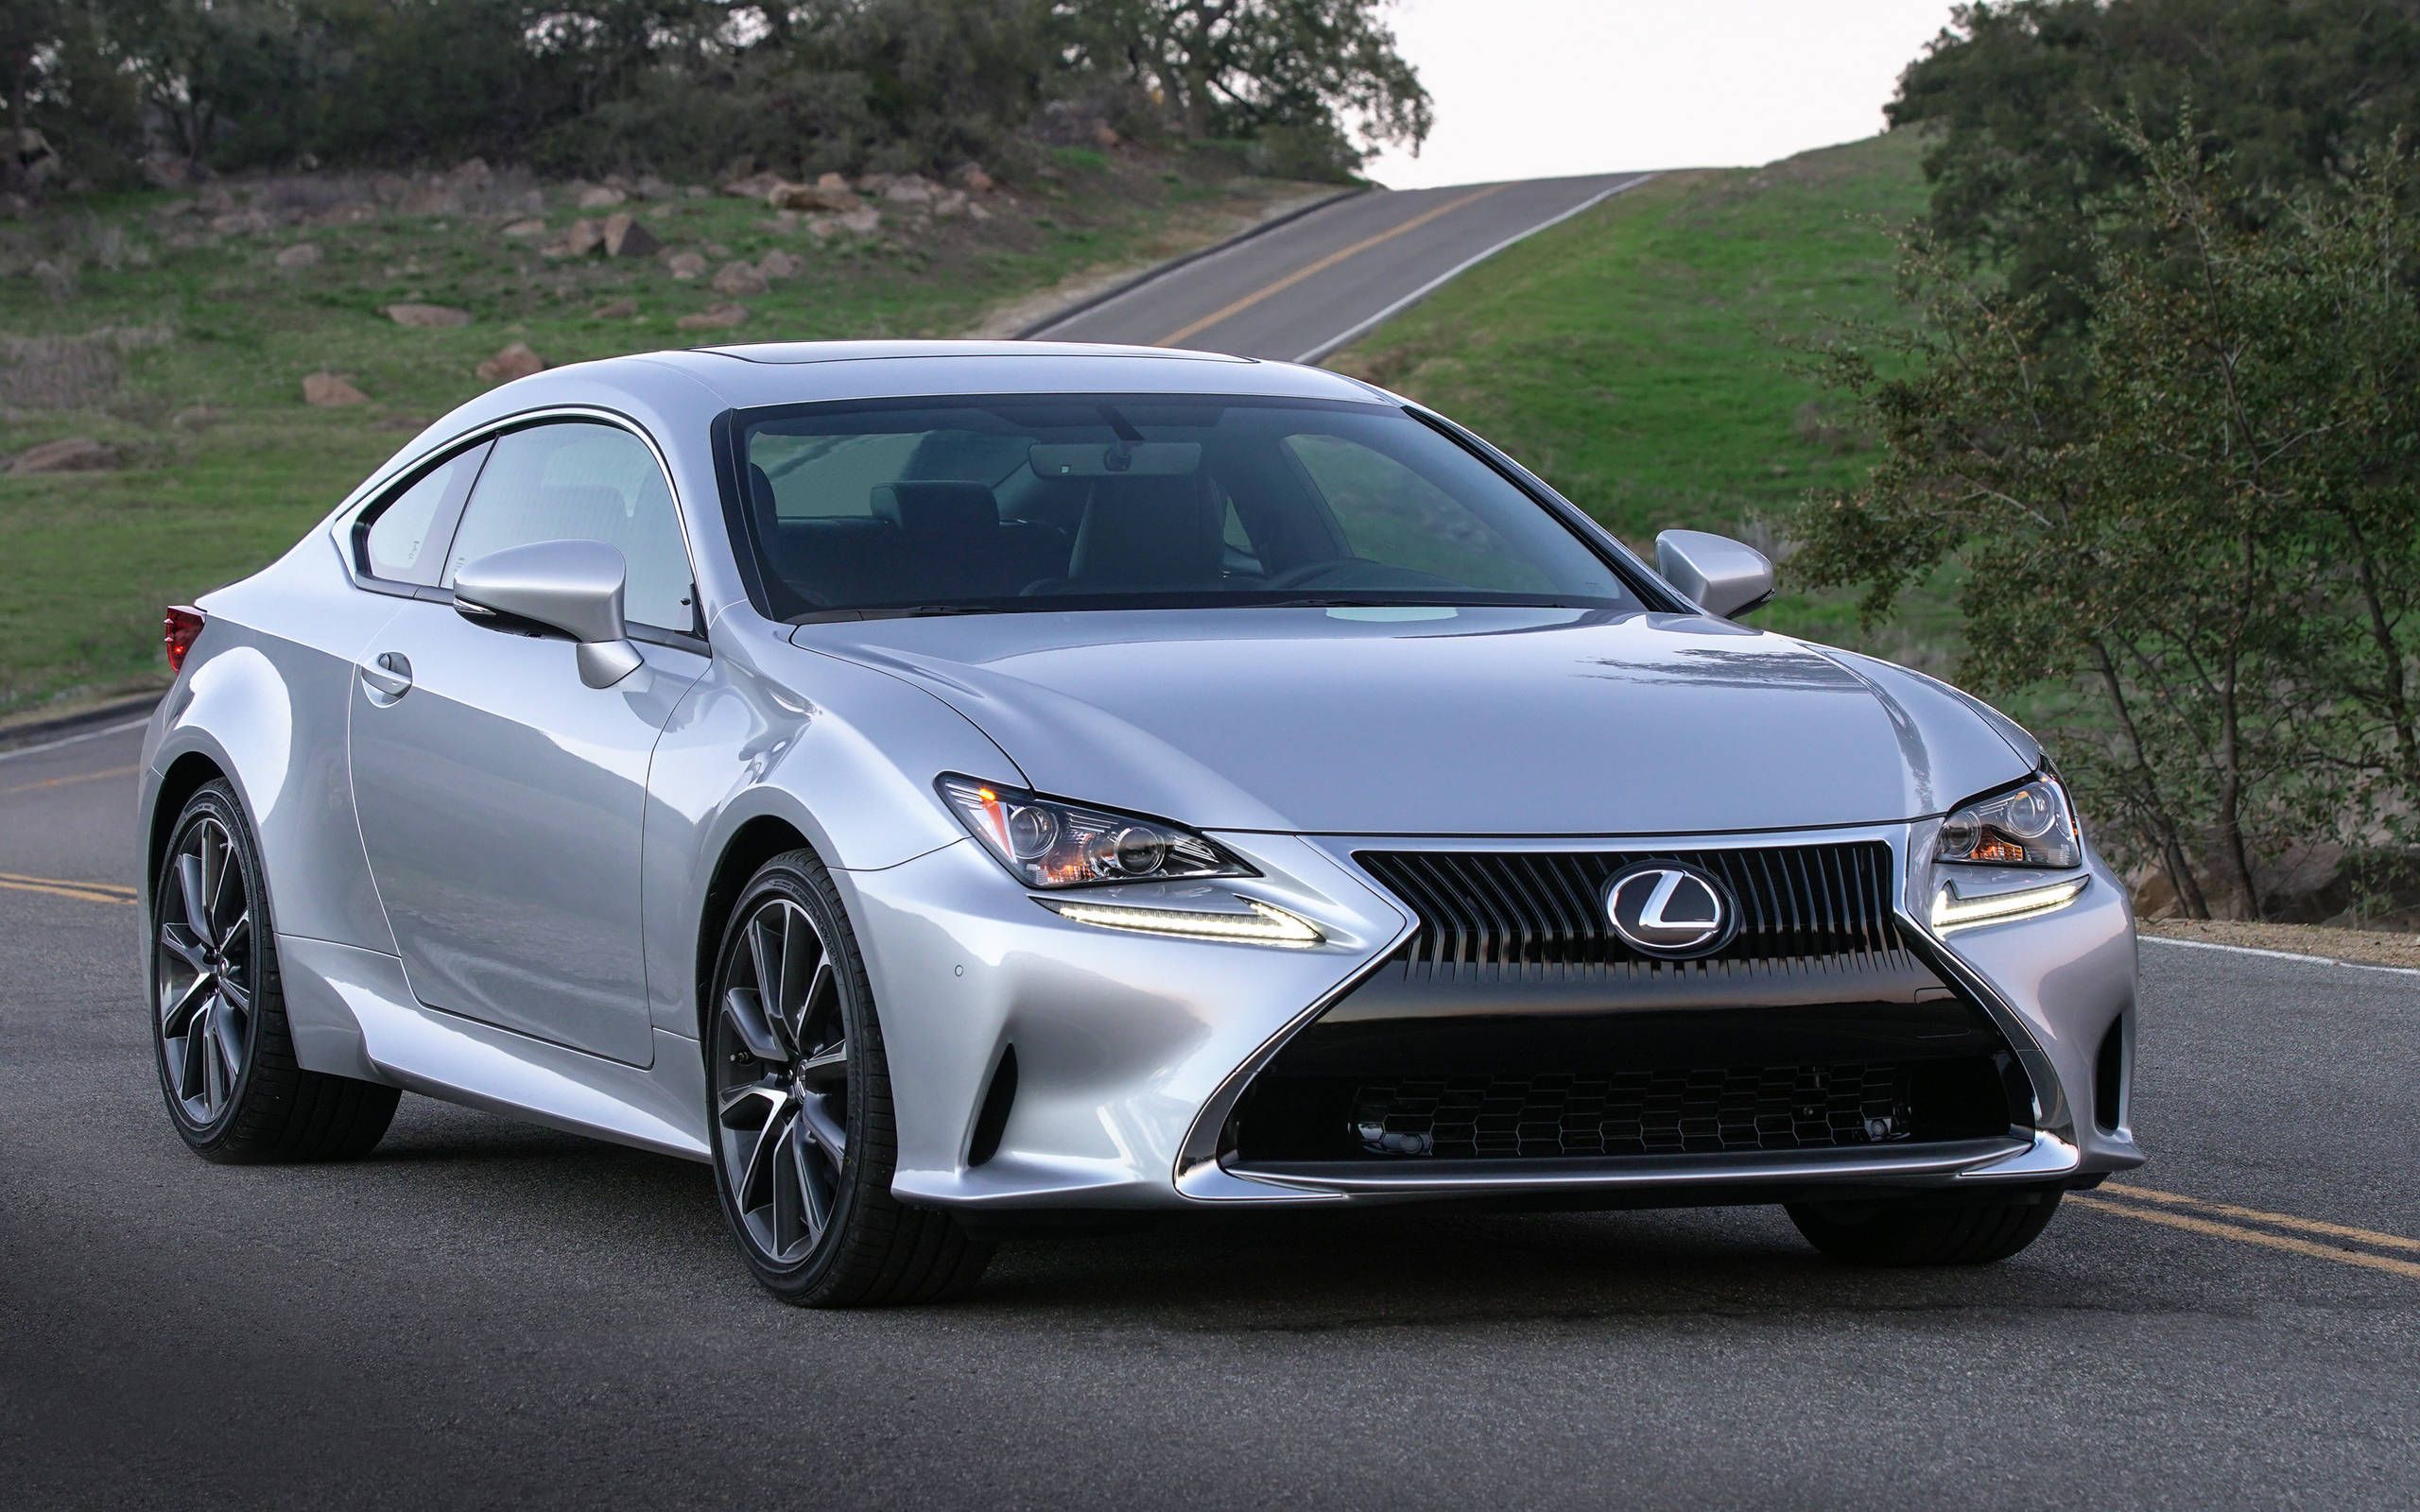 2017 Lexus Rc200t Review When You Want To Look Fast